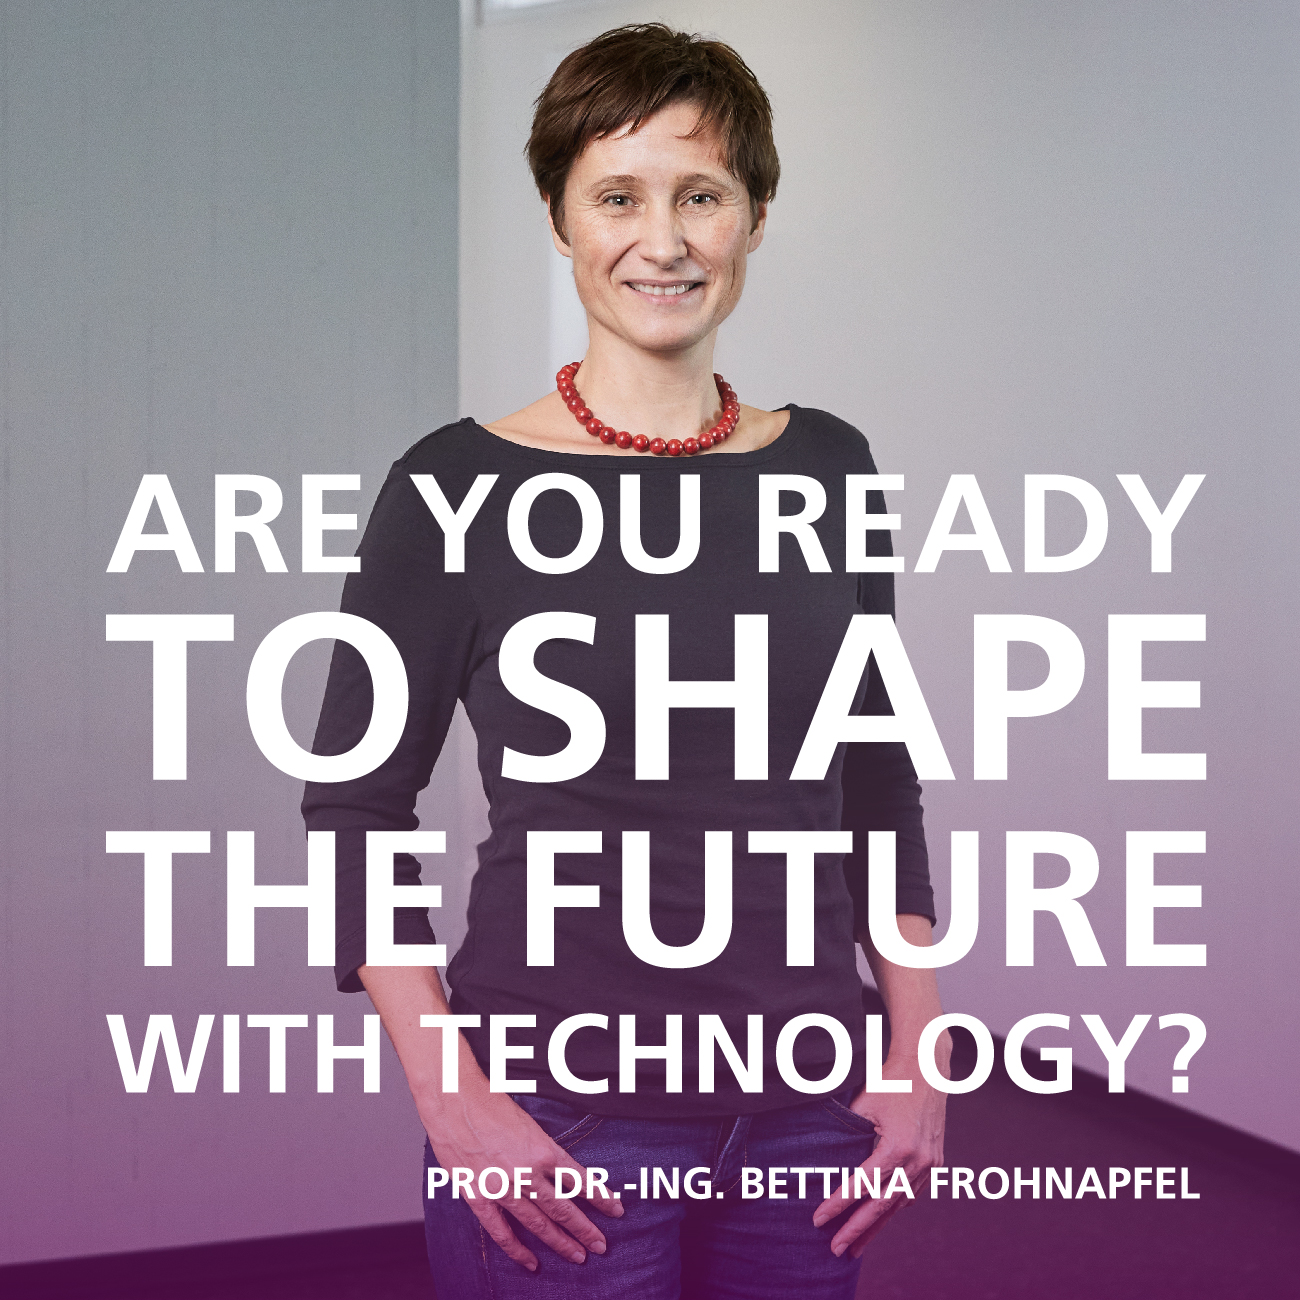 Are you ready to shape the future with technology? Quote by Prof. Dr.-Ing. Bettina Frohnapfel, Division 3, KIT